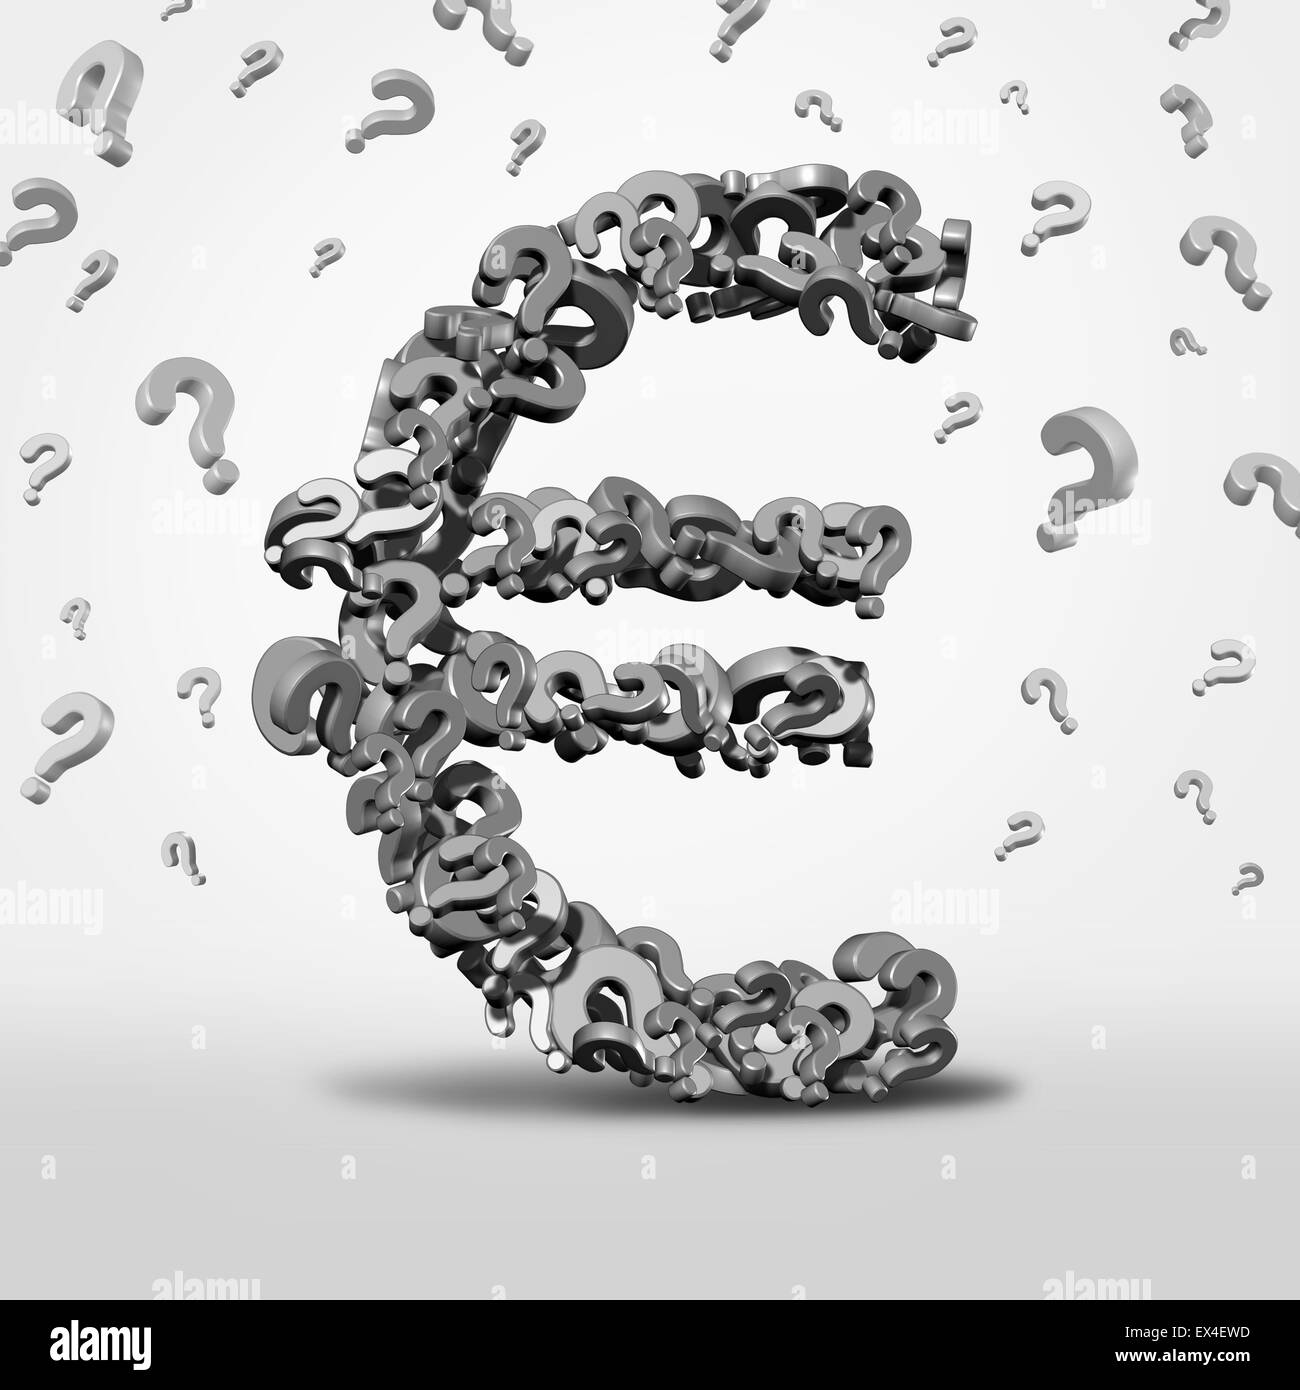 Euro questions and confusion concept as a currency symbol and financial guidance icon as a european money icon made of a group of question marks forecasting uncertainty and crisis risk. Stock Photo